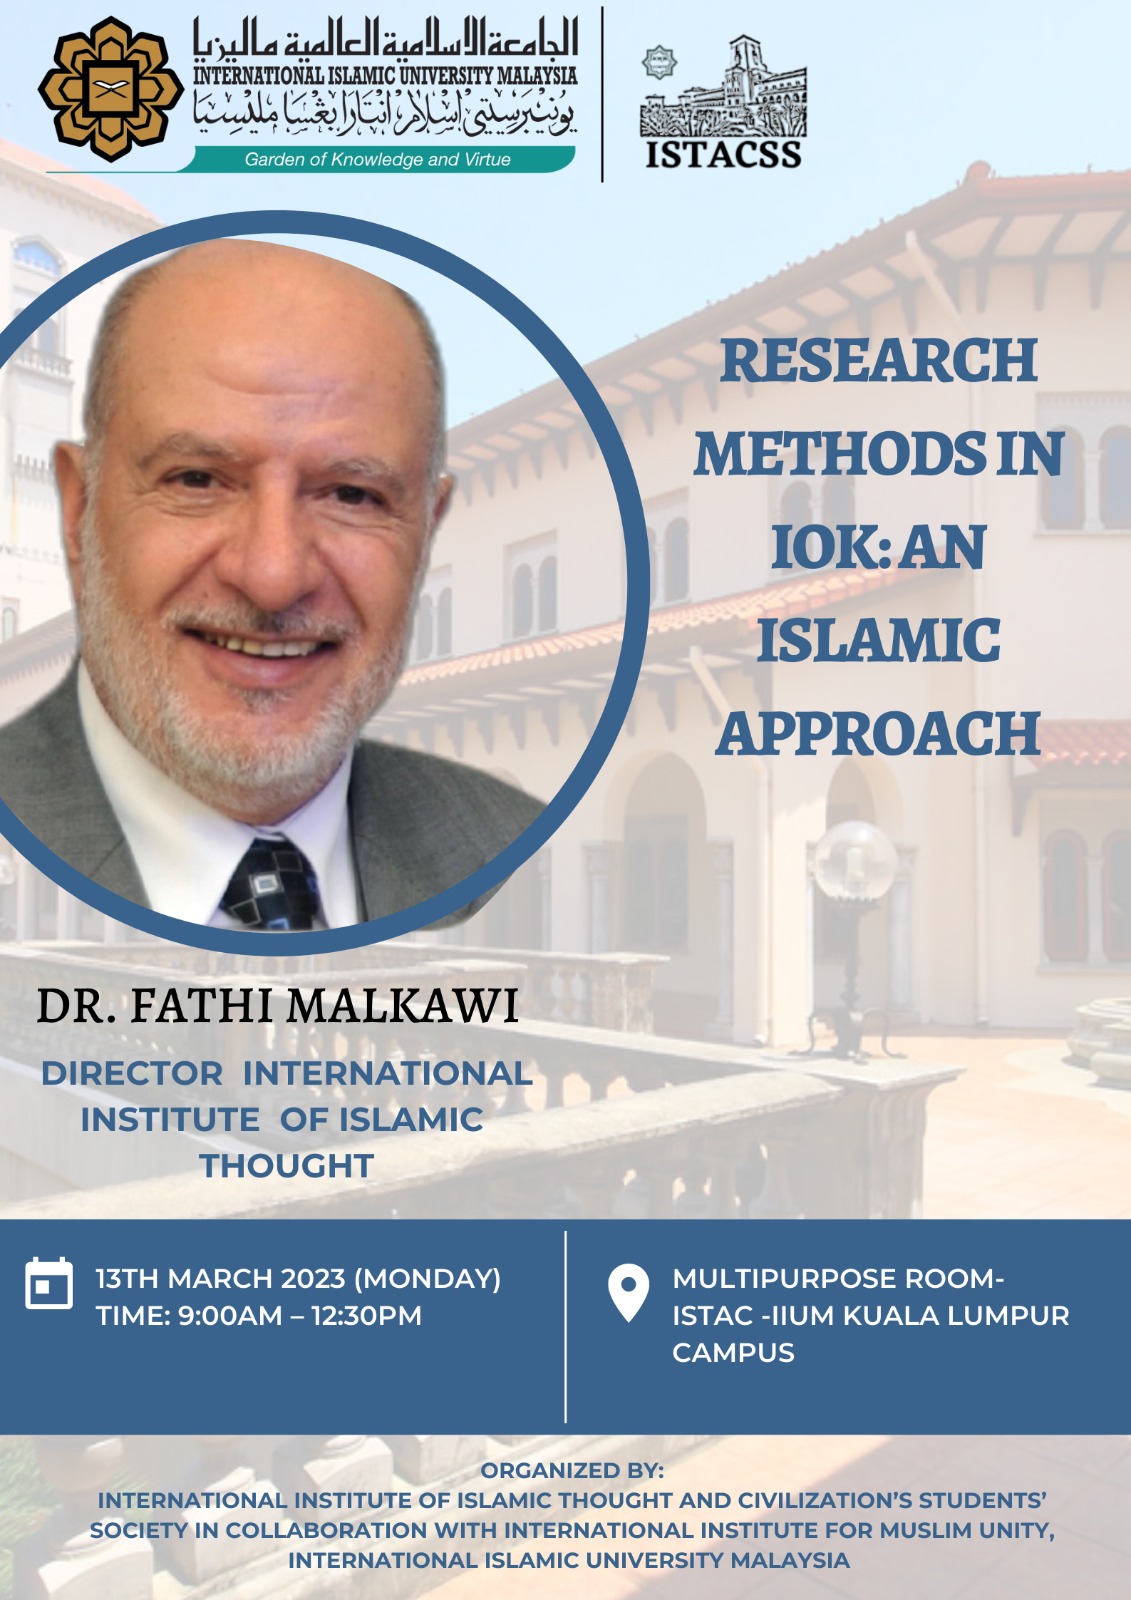 Research Methods in IOK: An Islamic Approach